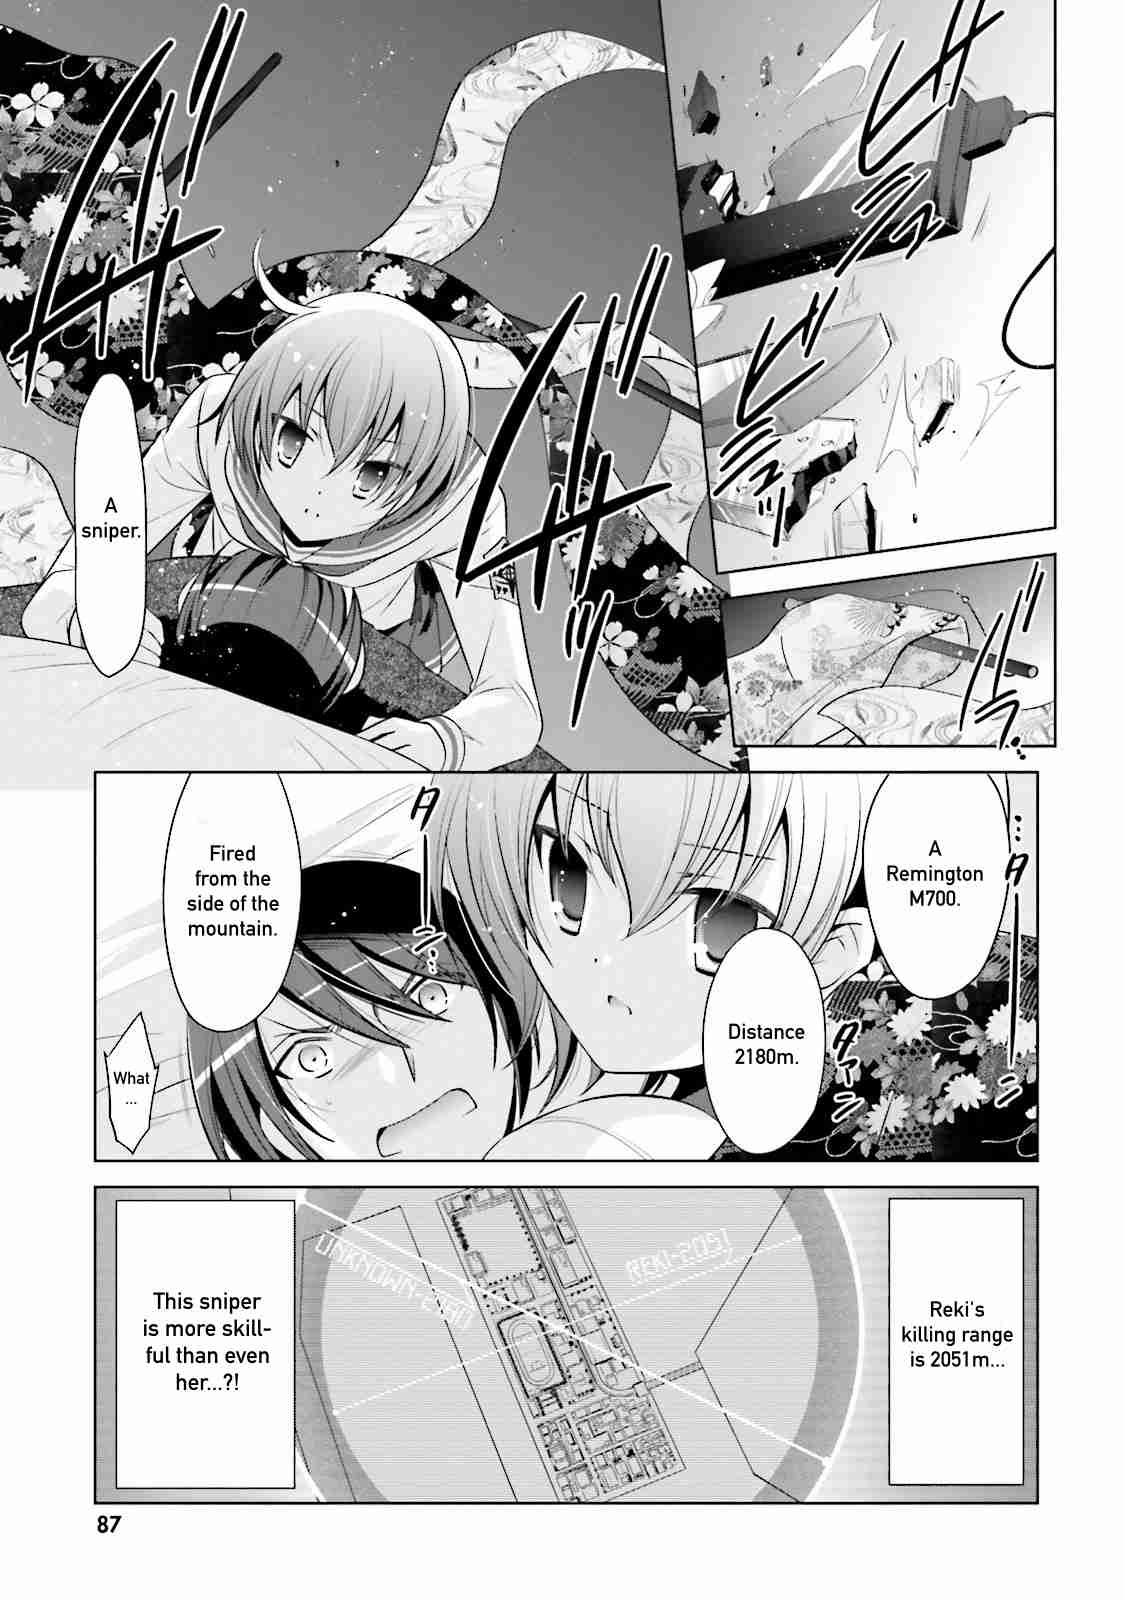 Hidan no Aria Vol. 14 Ch. 78 Moment of Relaxation